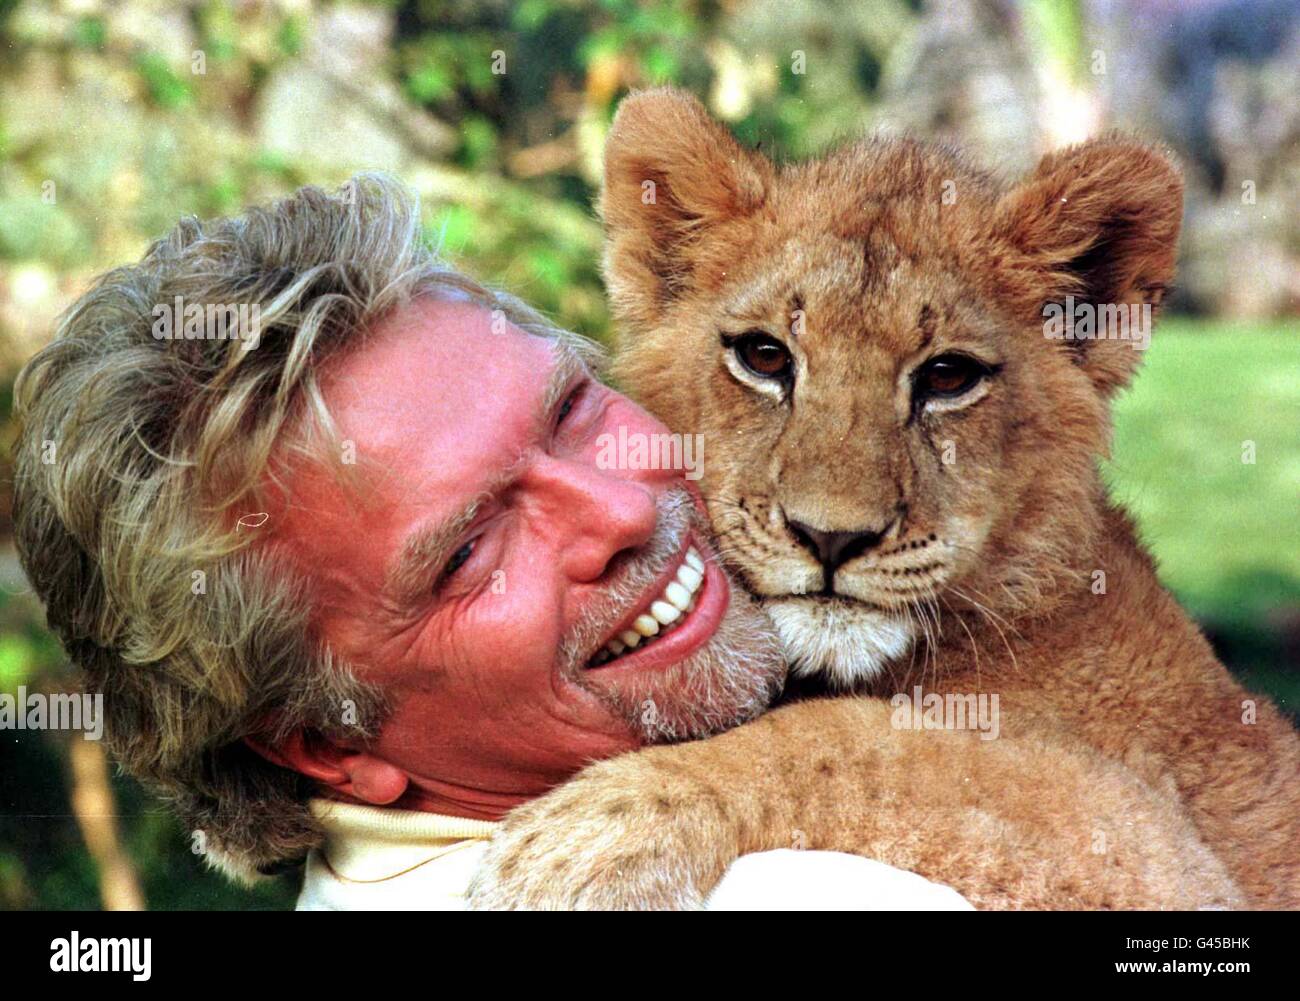 Virgin boss Richard Branson cuddles a young lion cub at Sun City in South Africa after ariving on his inaugural flight to Johannesburg, South Africa, last Thursday. Photo by Adam Butler/PA. Stock Photo